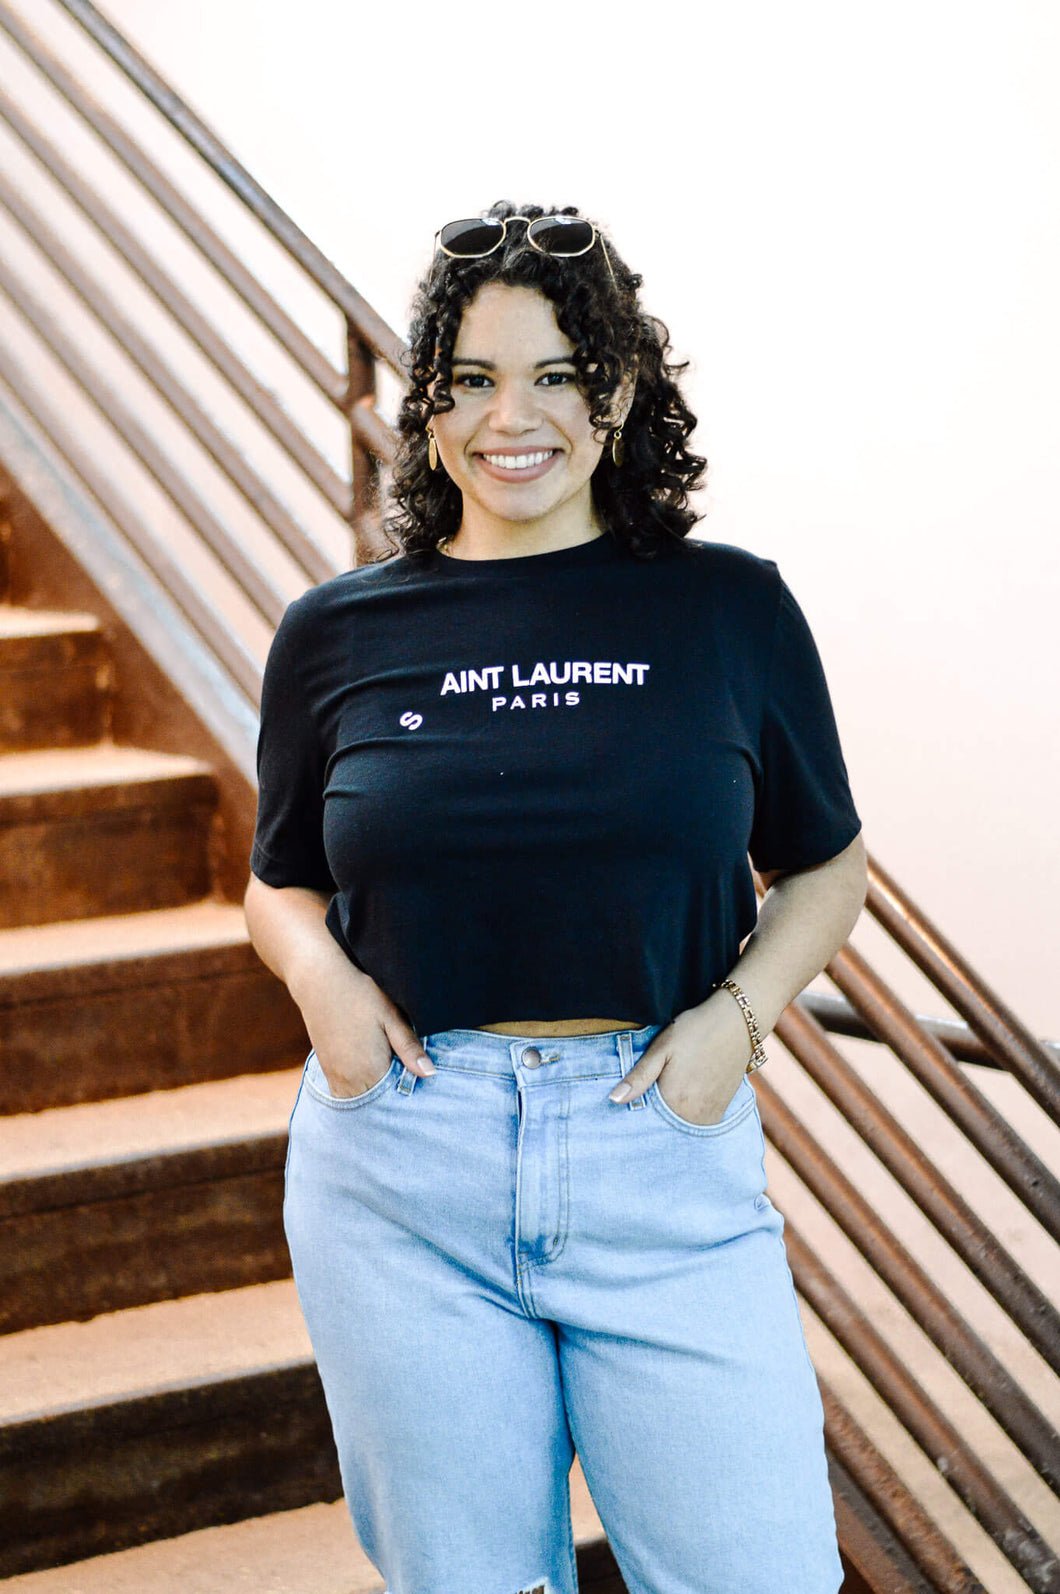 Women's Aint Laurent cropped graphic tee. Paired with ripped high waisted boyfriend jeans